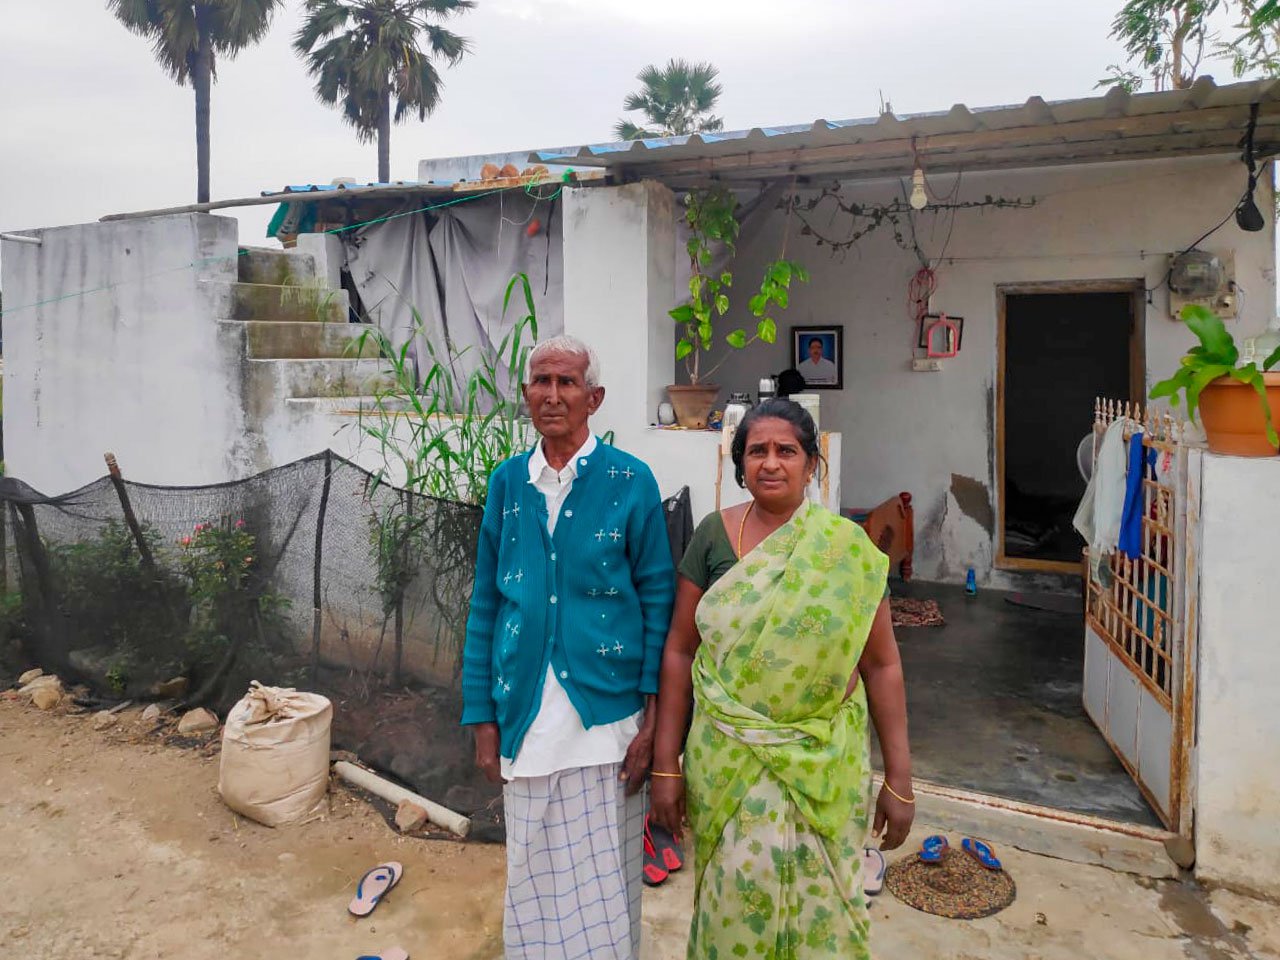 Vimala's husband, D. Amarnath Reddy, could not harvest his tomato crop because of the Covid-19 lockdown